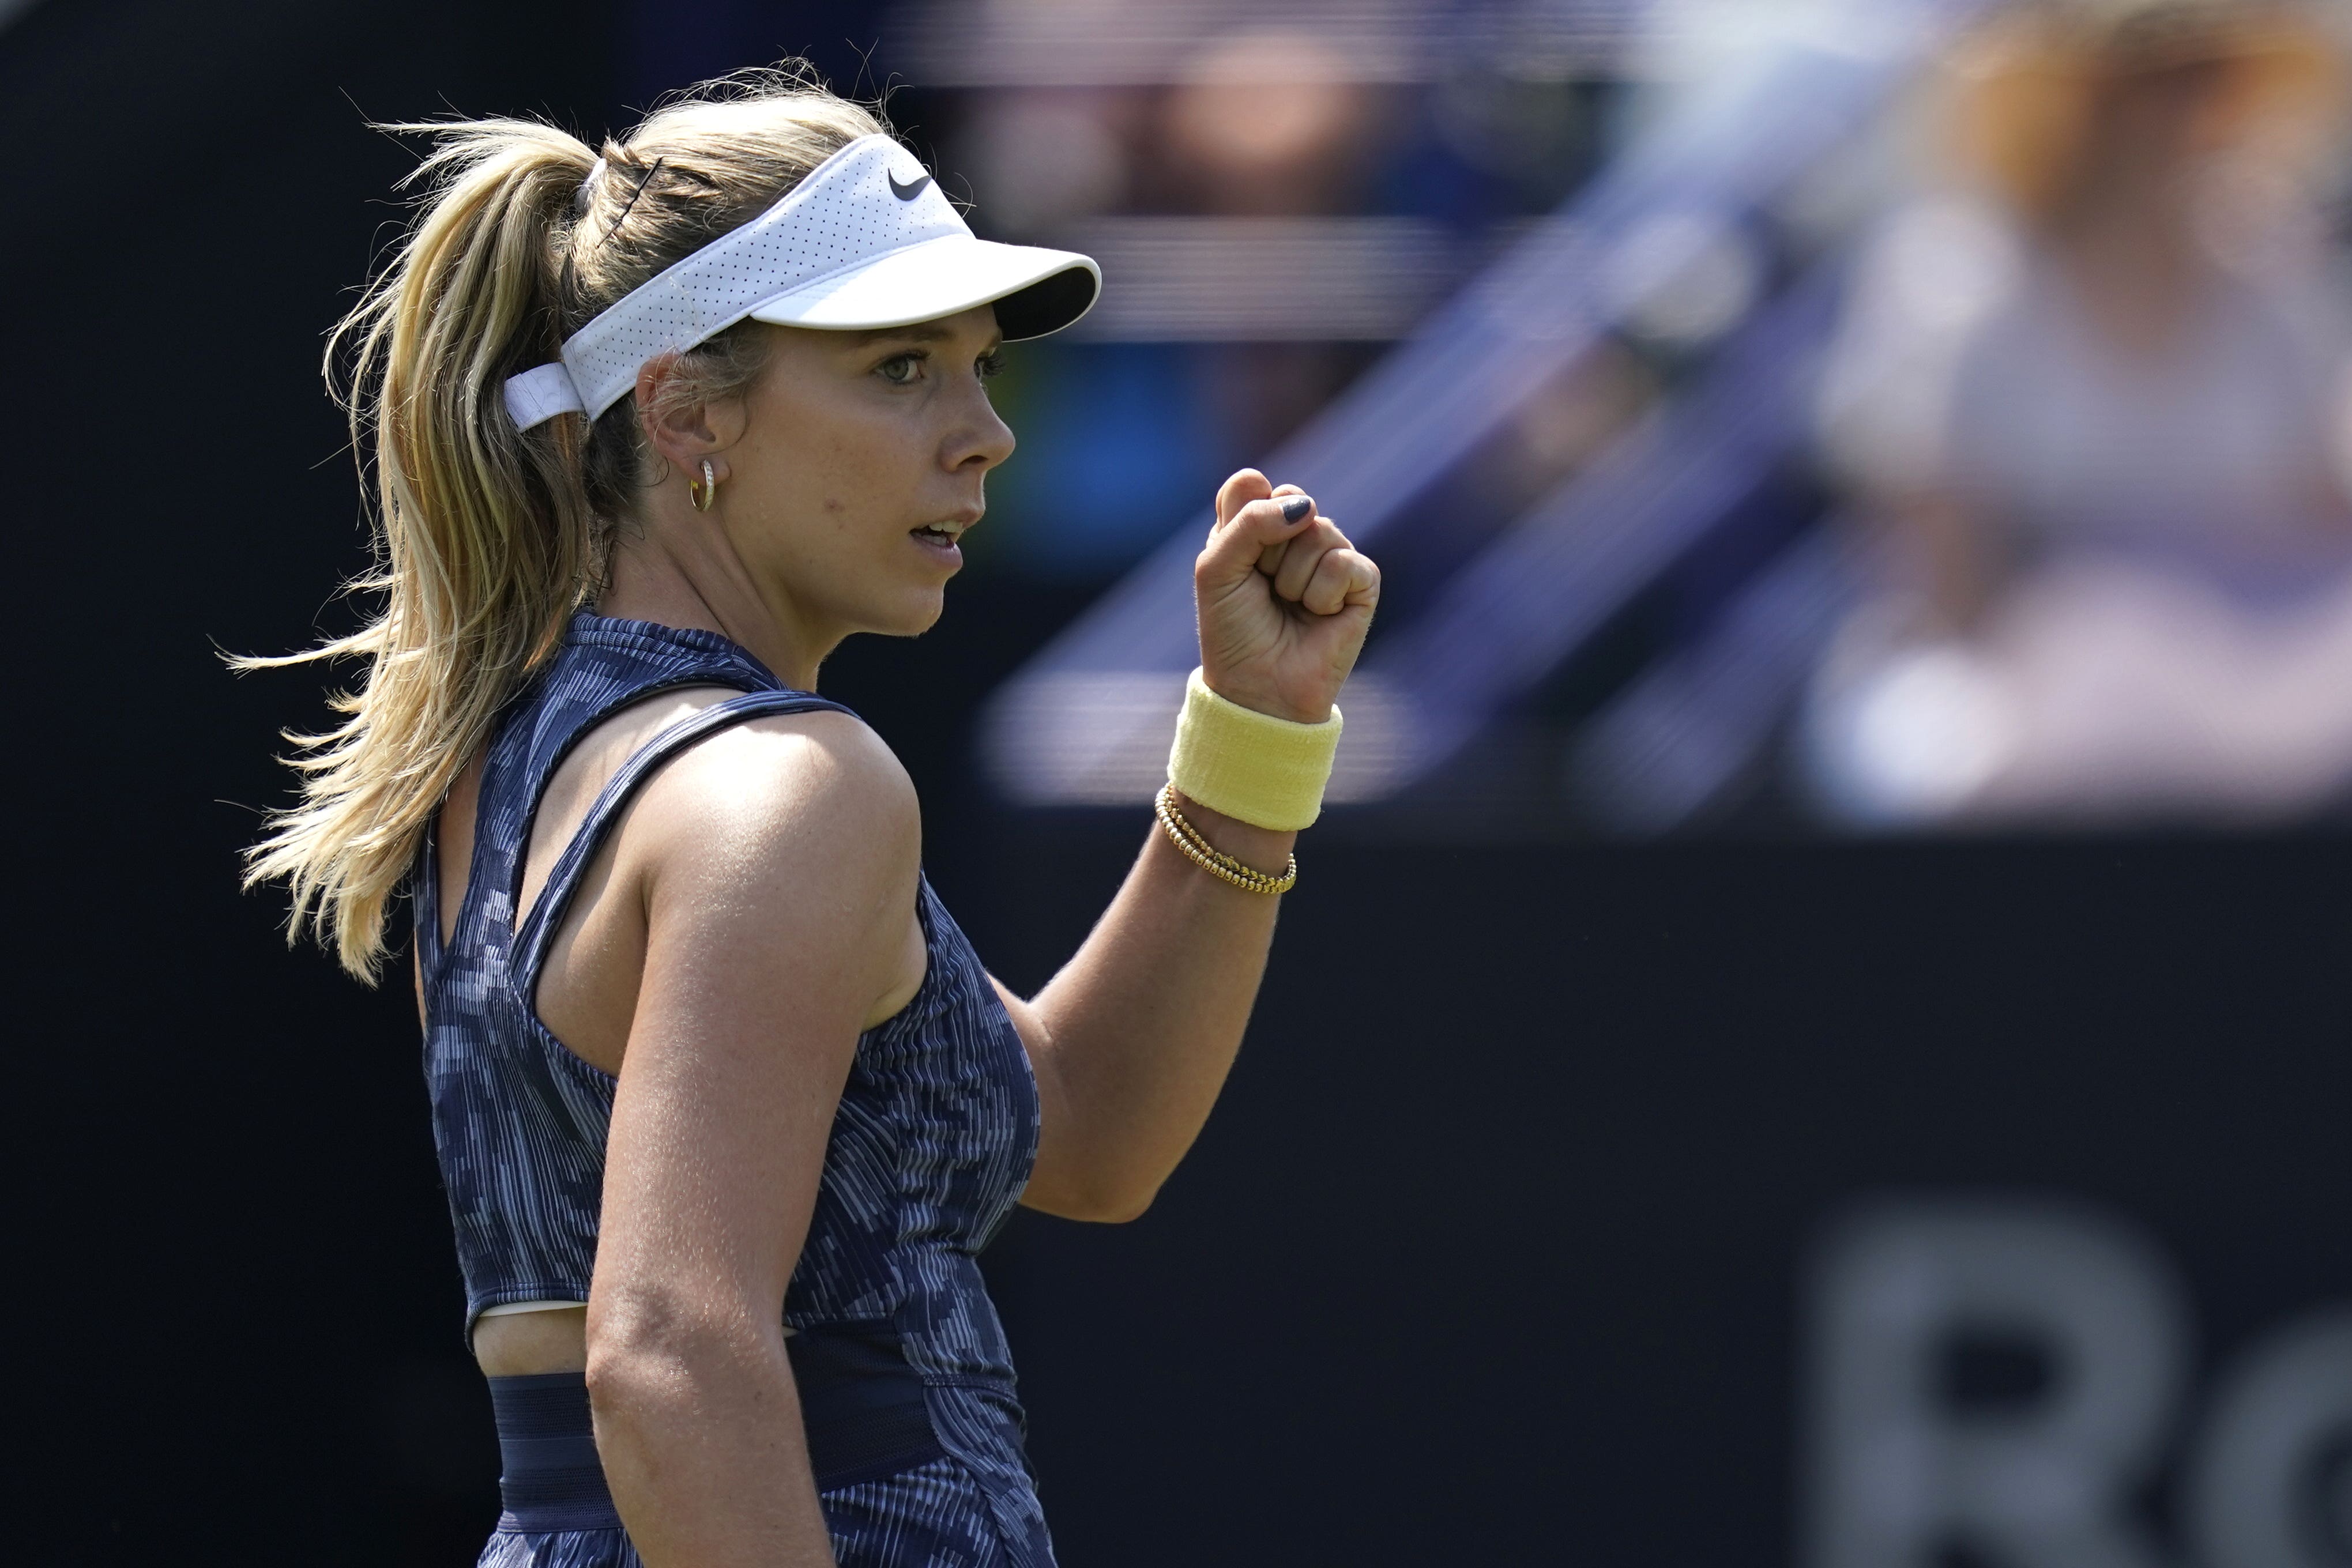 Katie Boulter celebrates winning a point against Jelena Ostapenko in Eastbourne (Andrew Matthews/PA)